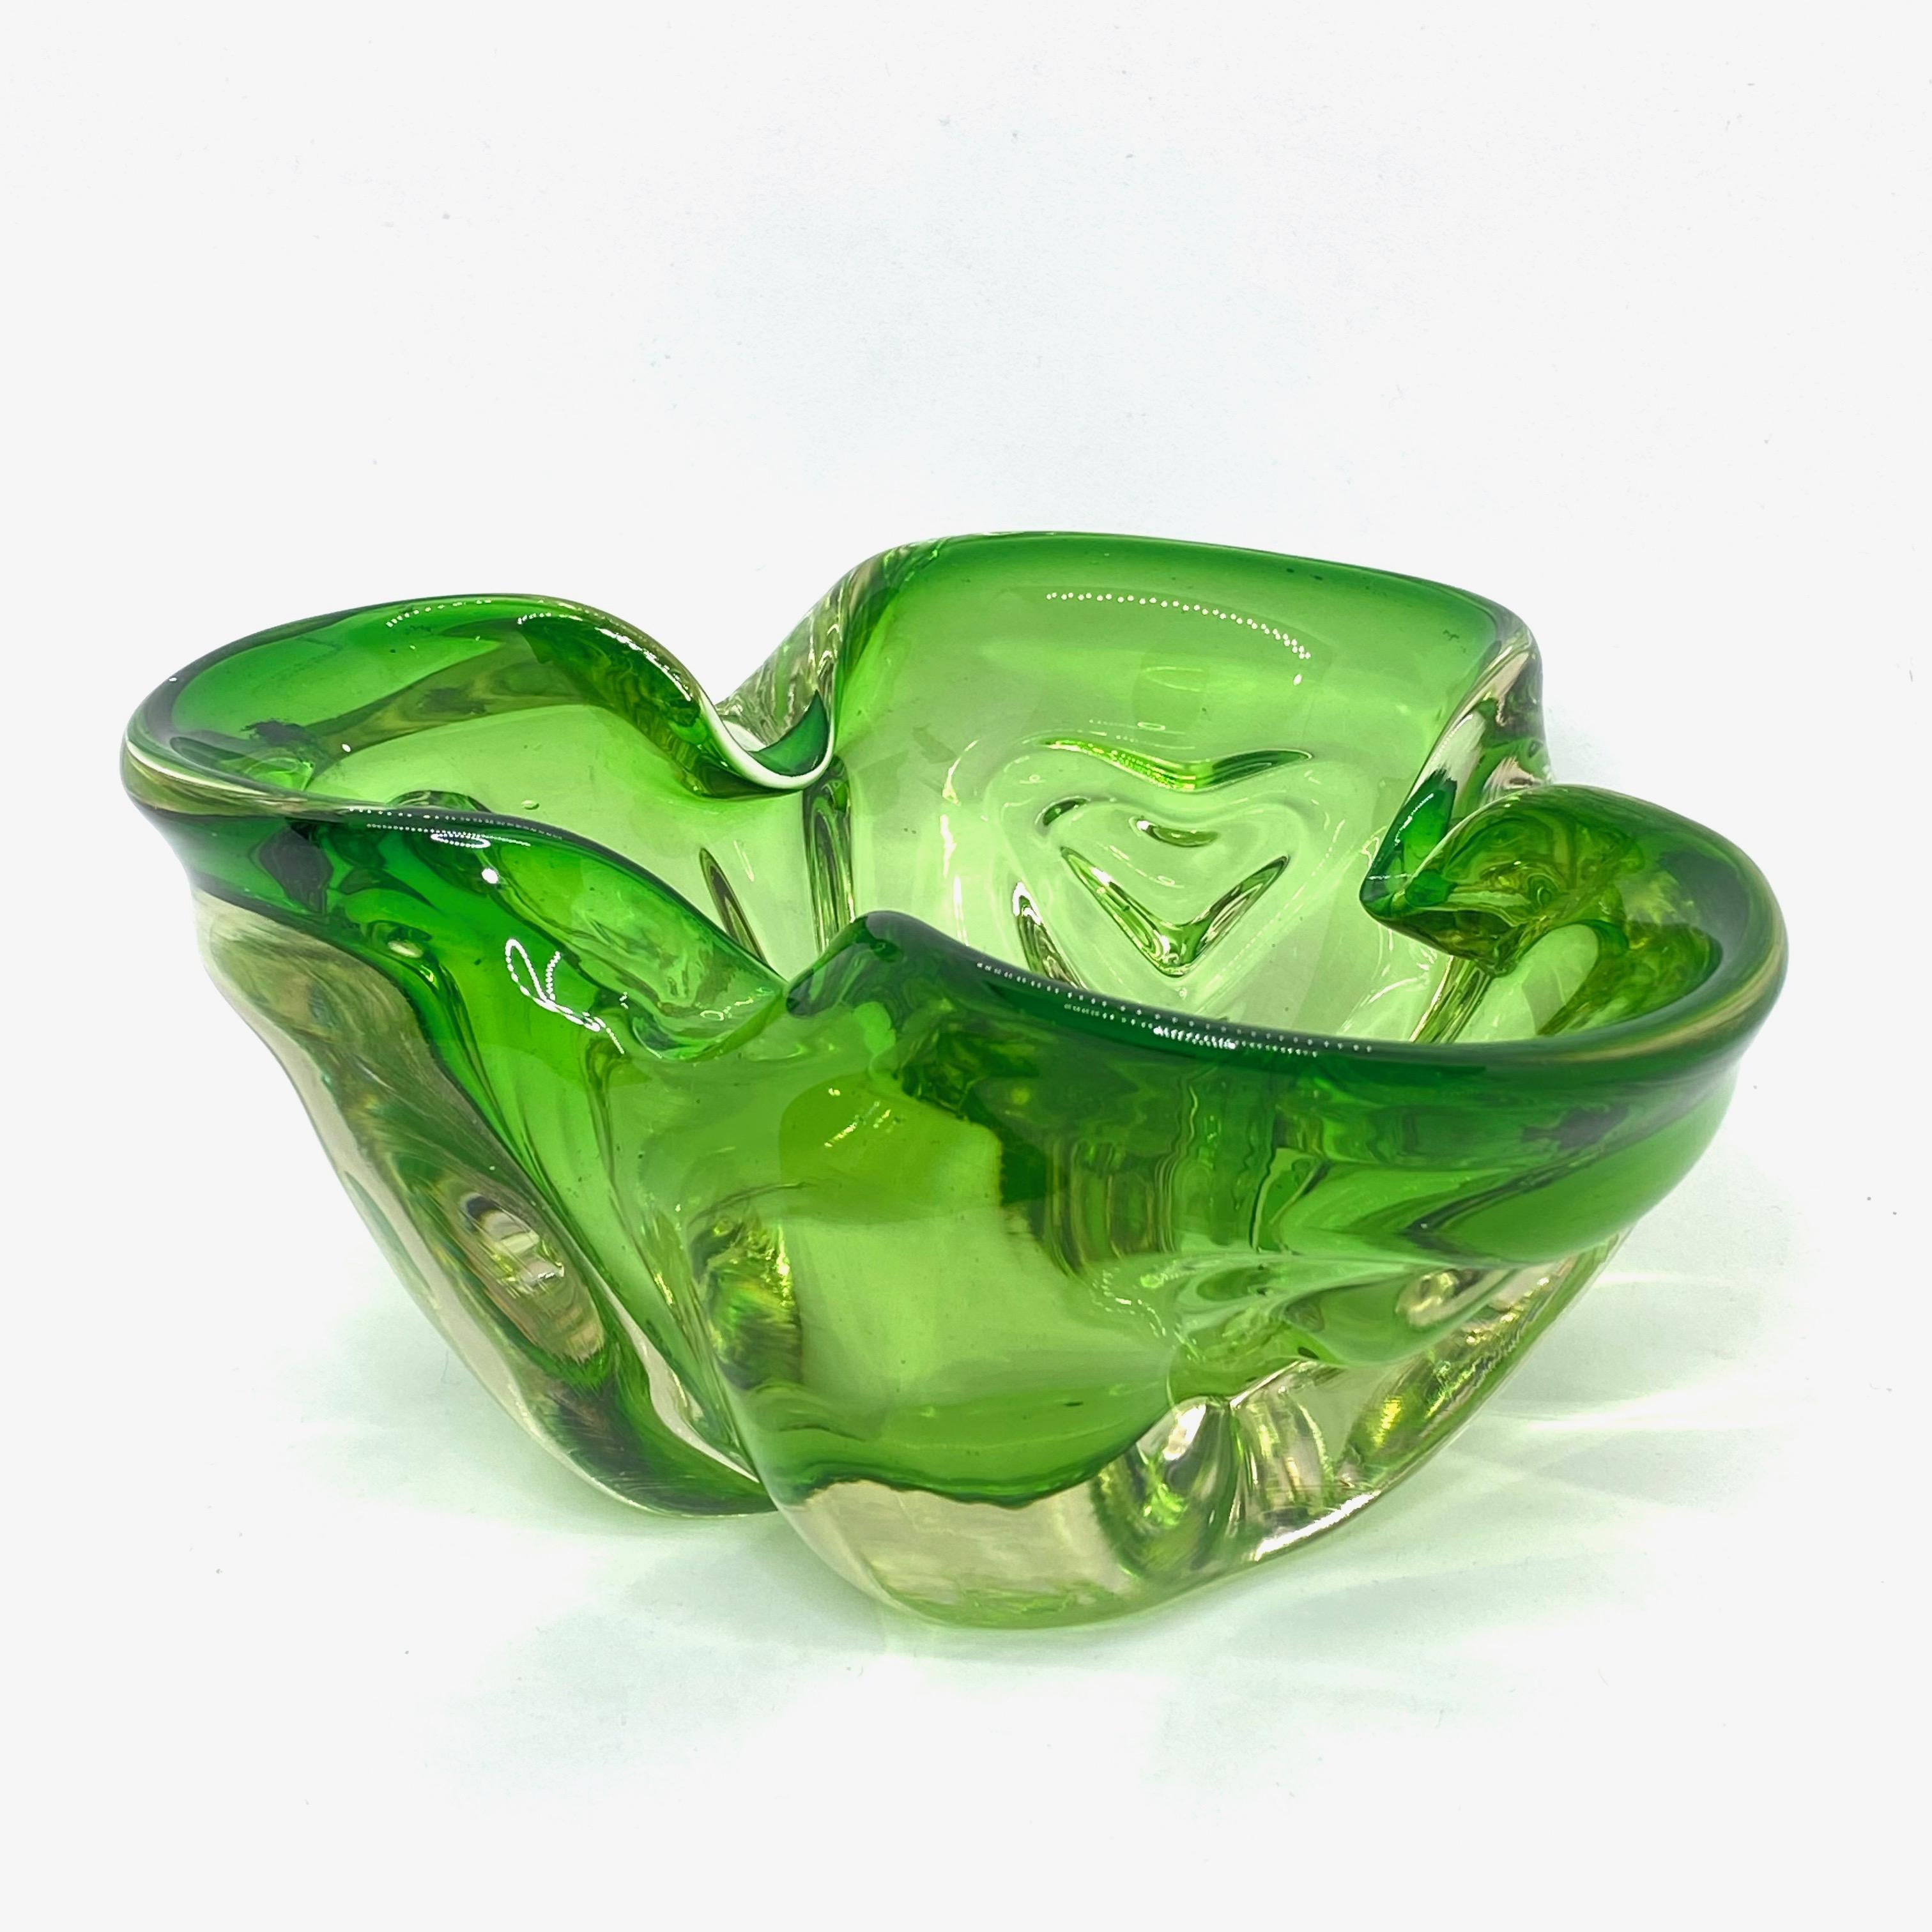 Gorgeous hand blown Murano art glass piece with Sommerso and bullicante techniques. A beautiful organic shaped bowl, catchall, Venice, Murano, Italy, 1970s.